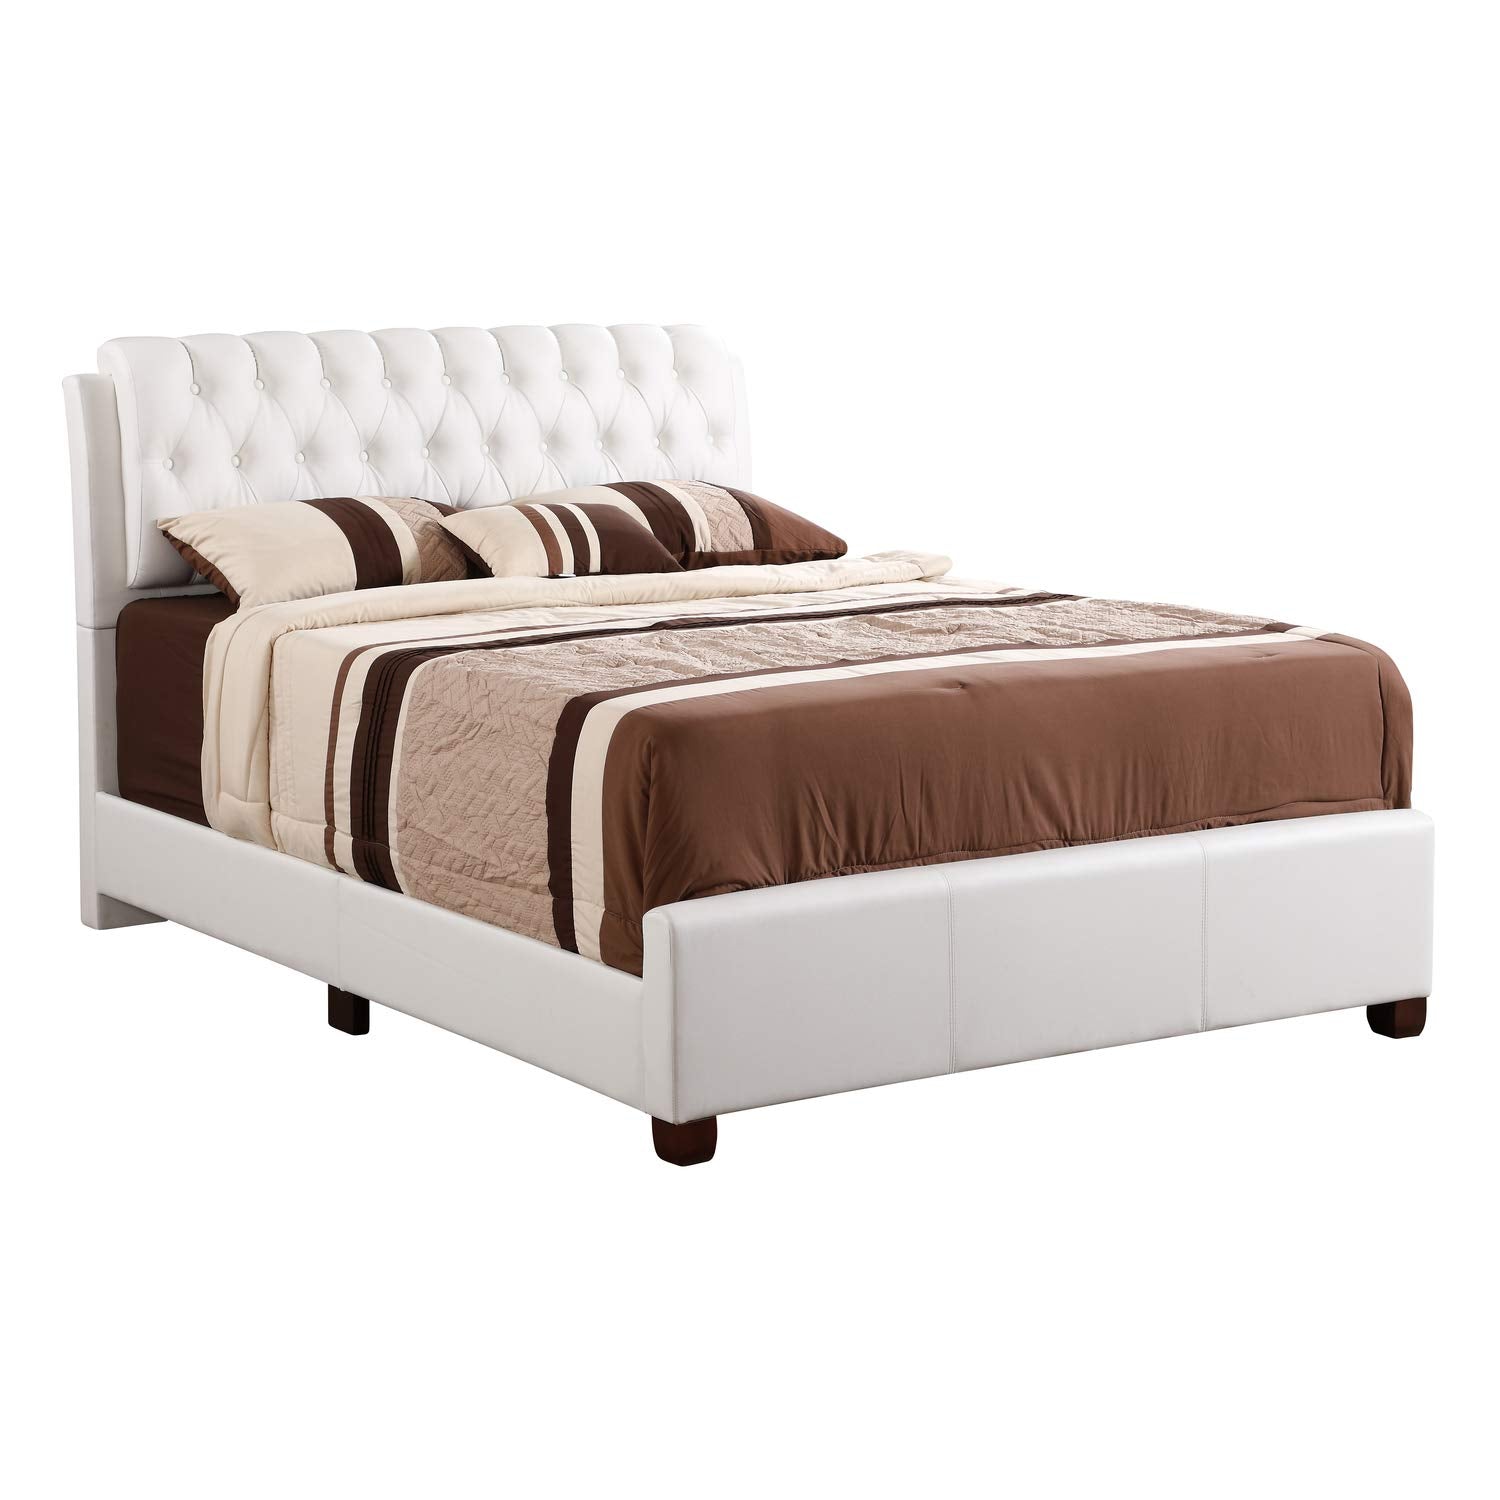 Glory Furniture Marilla Faux Leather Upholstered Queen Bed in White